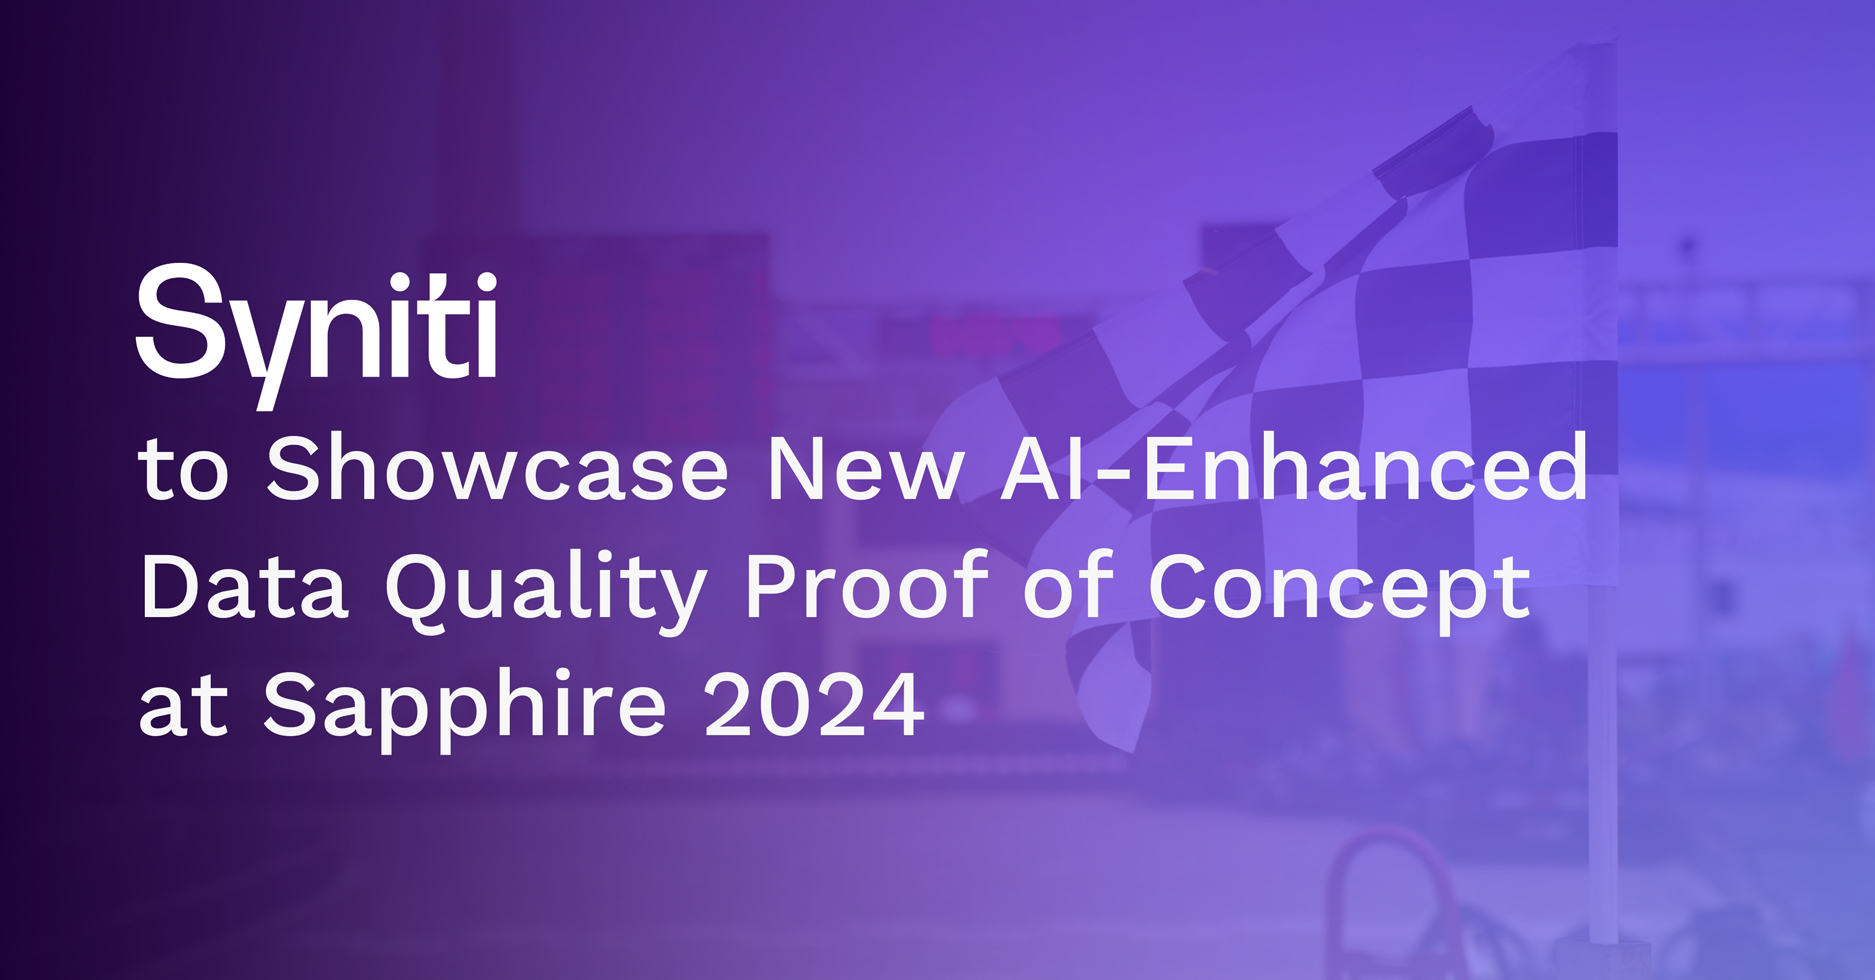 Syniti to Showcase New AI-Enhanced Data Quality Proof of Concept at Sapphire 2024 